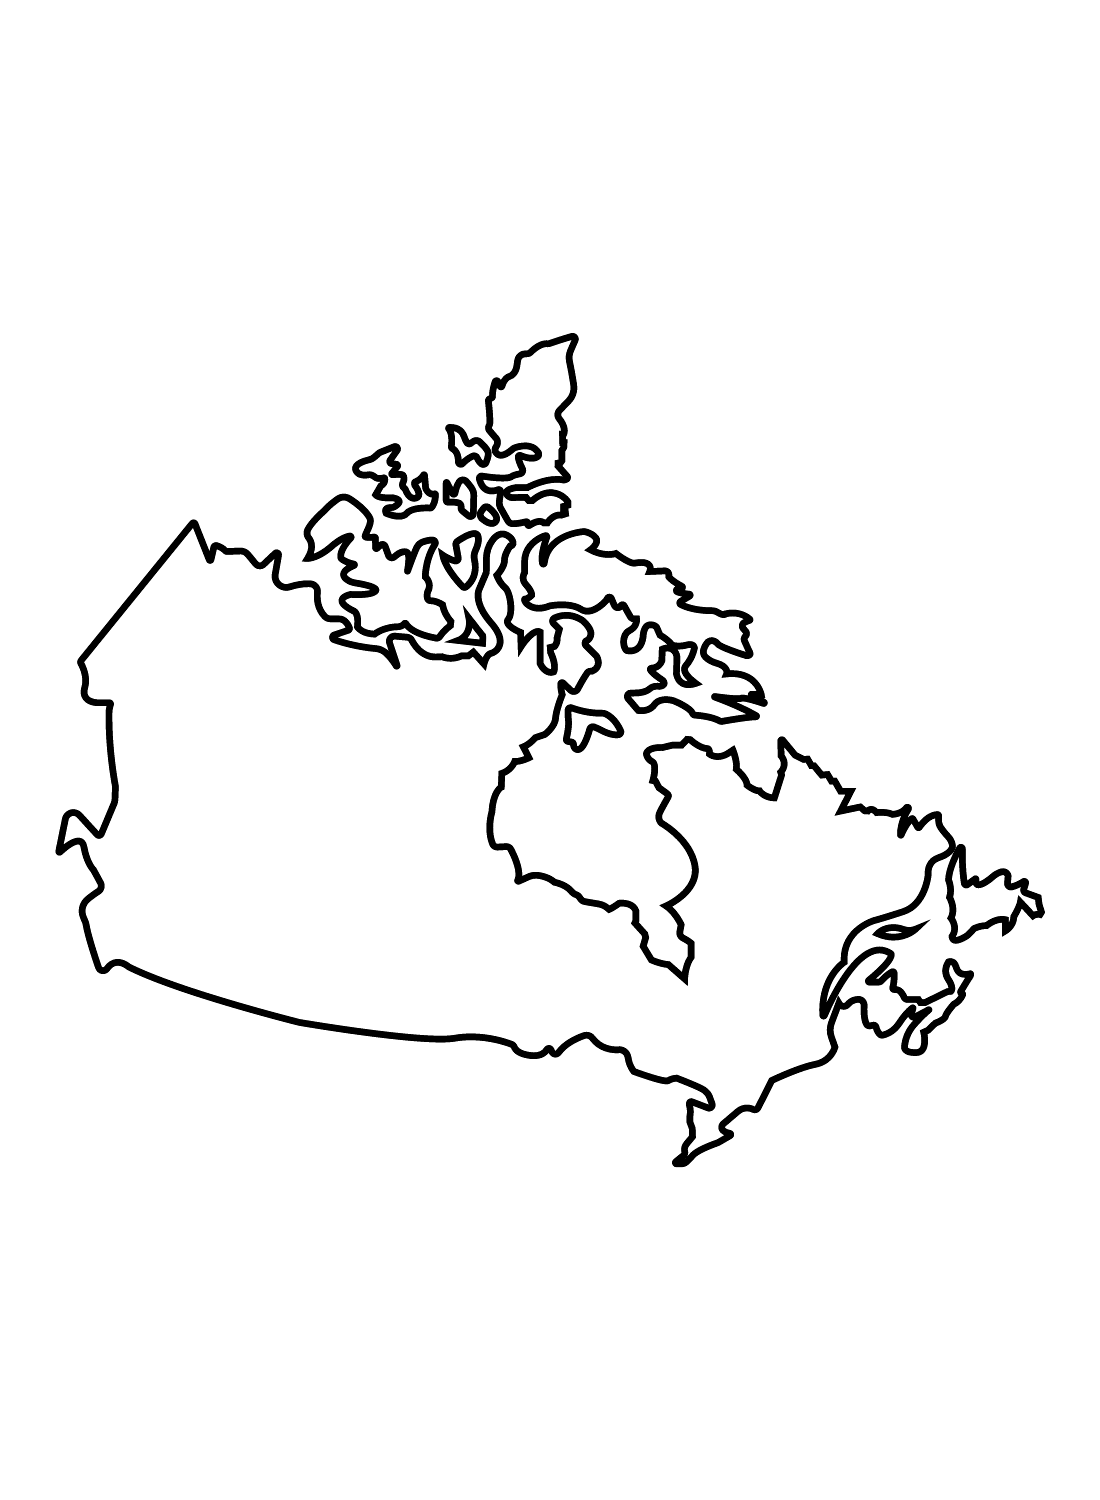 Canada coloring pages printable for free download